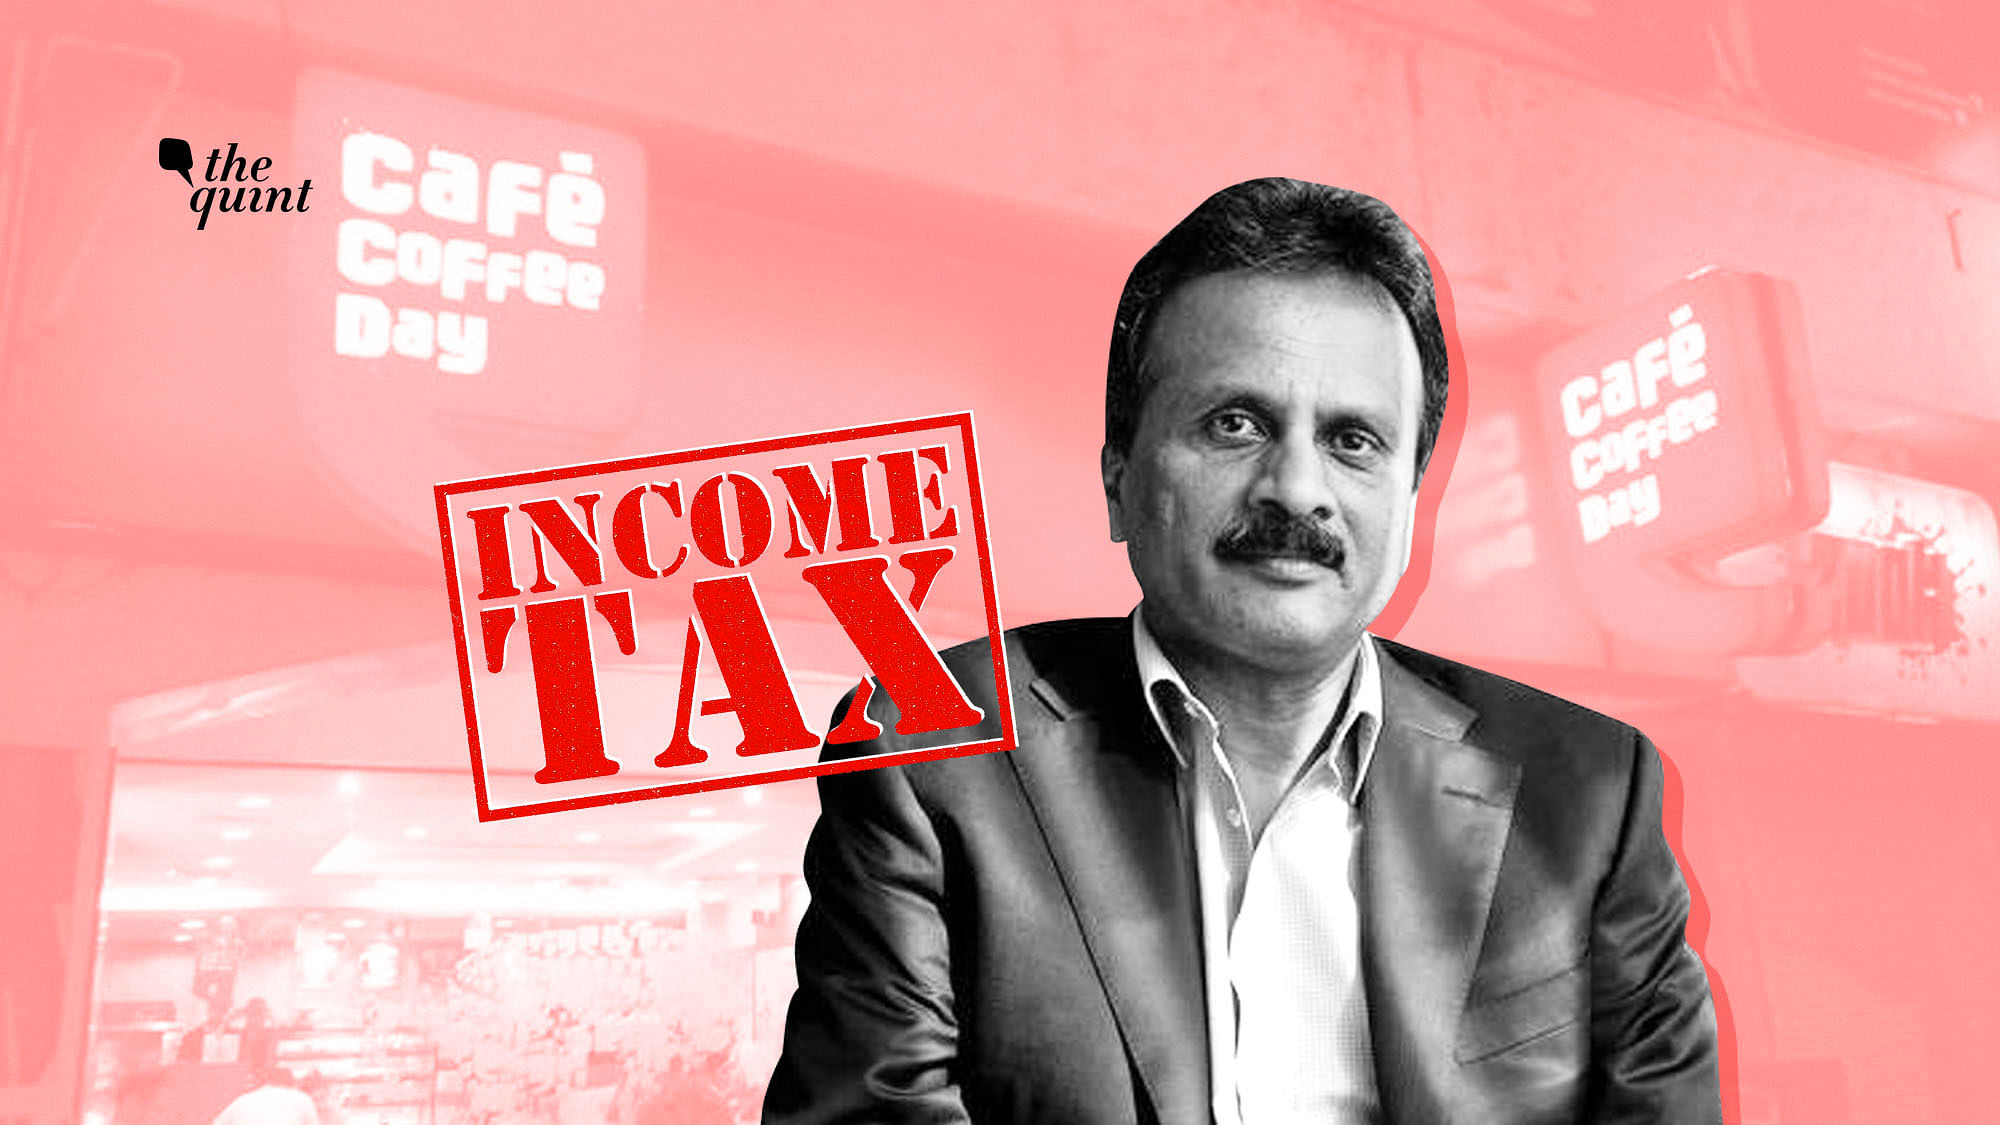 In a letter reportedly written by VG Siddhartha, the coffee tycoon blames private equity investors and tax officials for his financial condition.